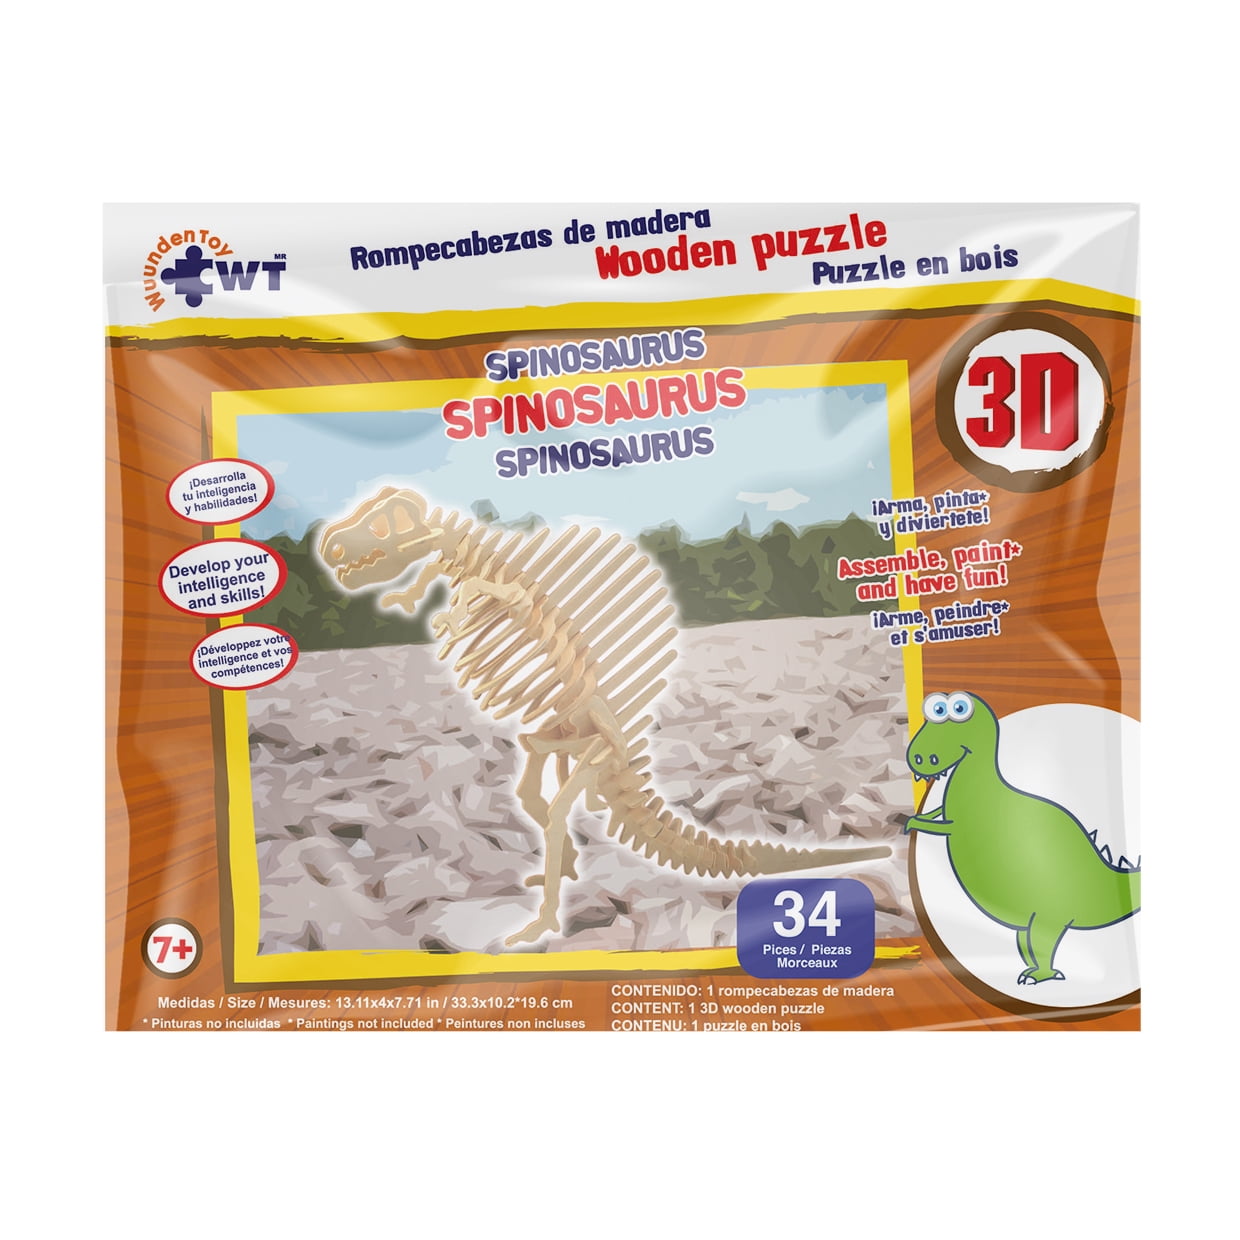 Spinosaurus wooden 3D Puzzle Wood Craft Construction Kit 